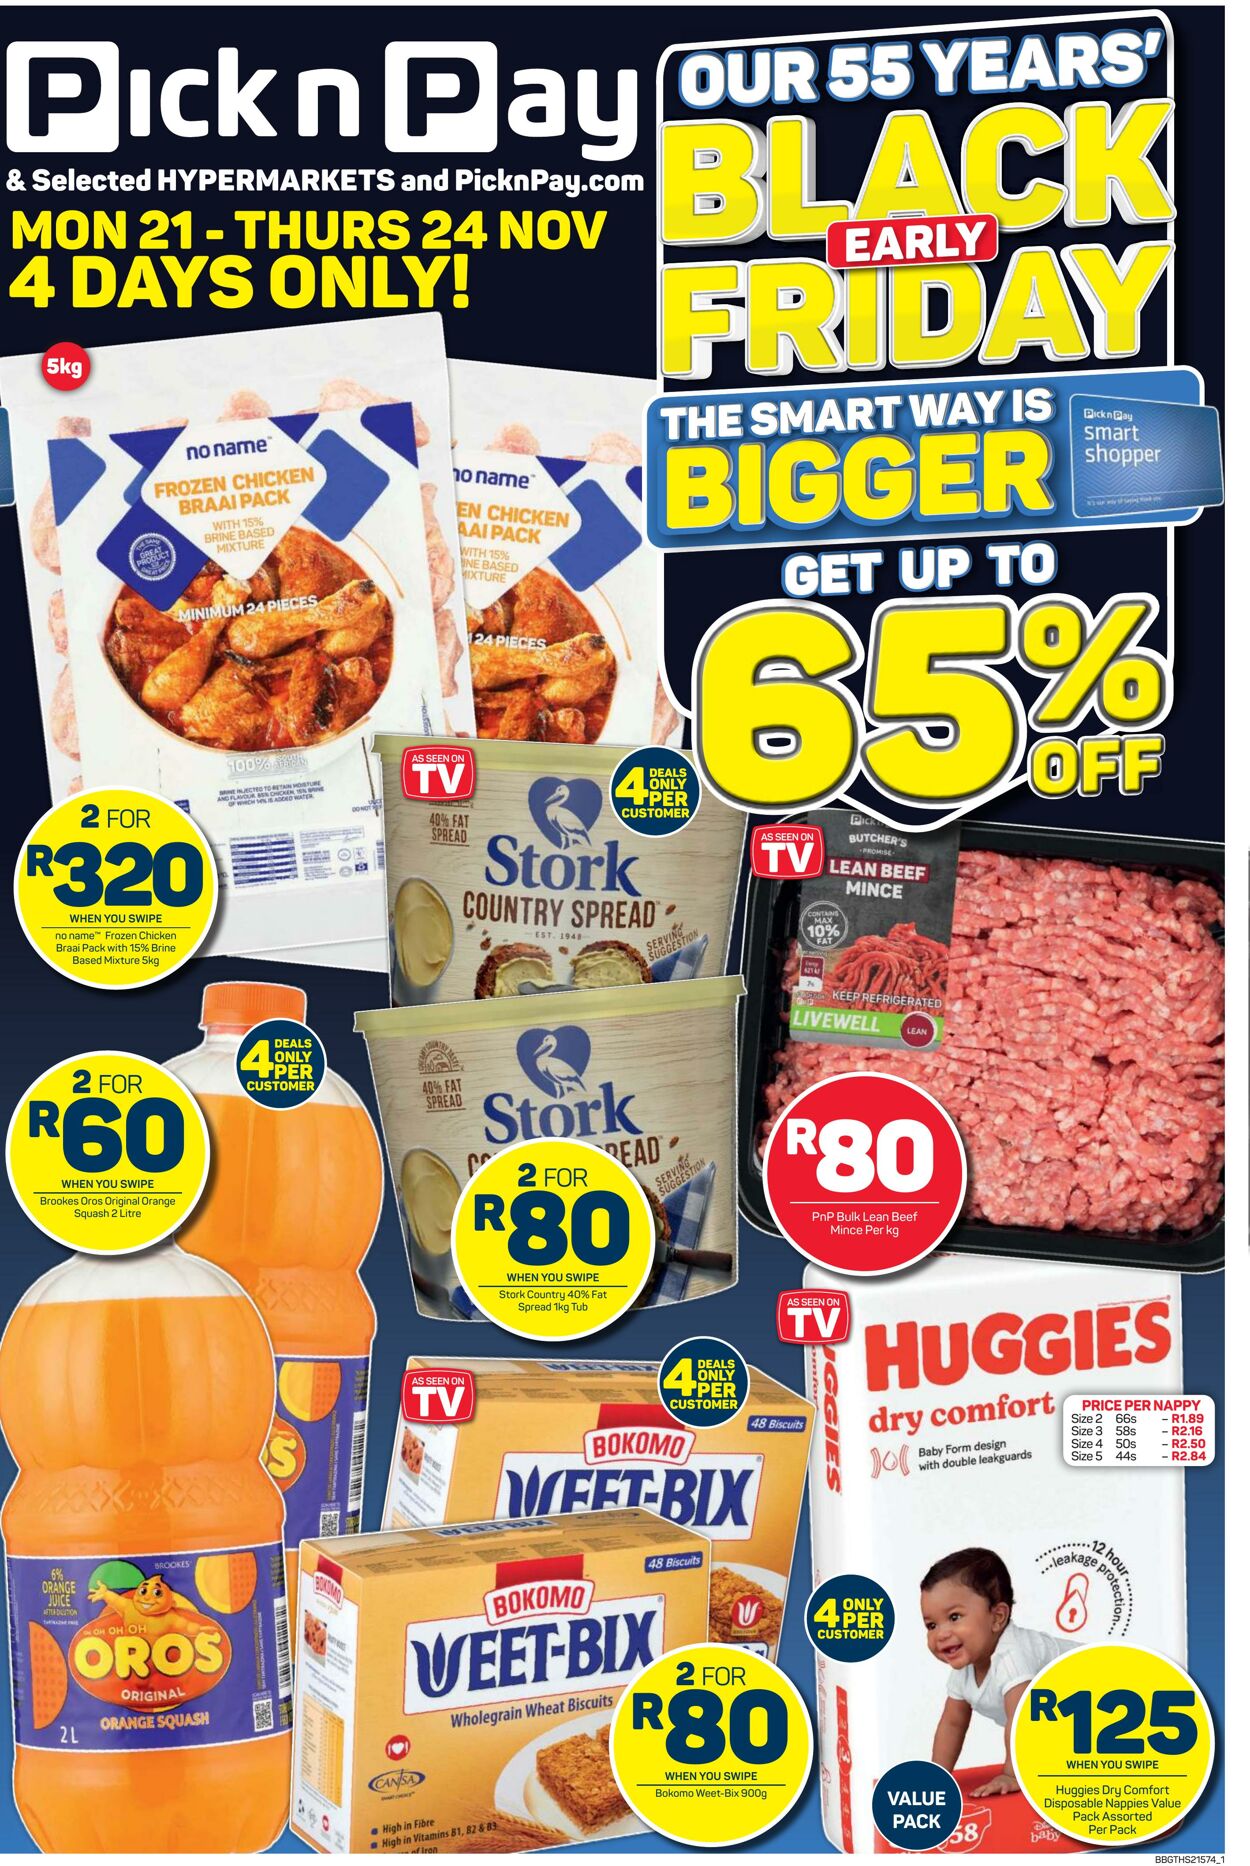 Pick n Pay Promotional Leaflet Black Friday 2023 Valid from 21.11